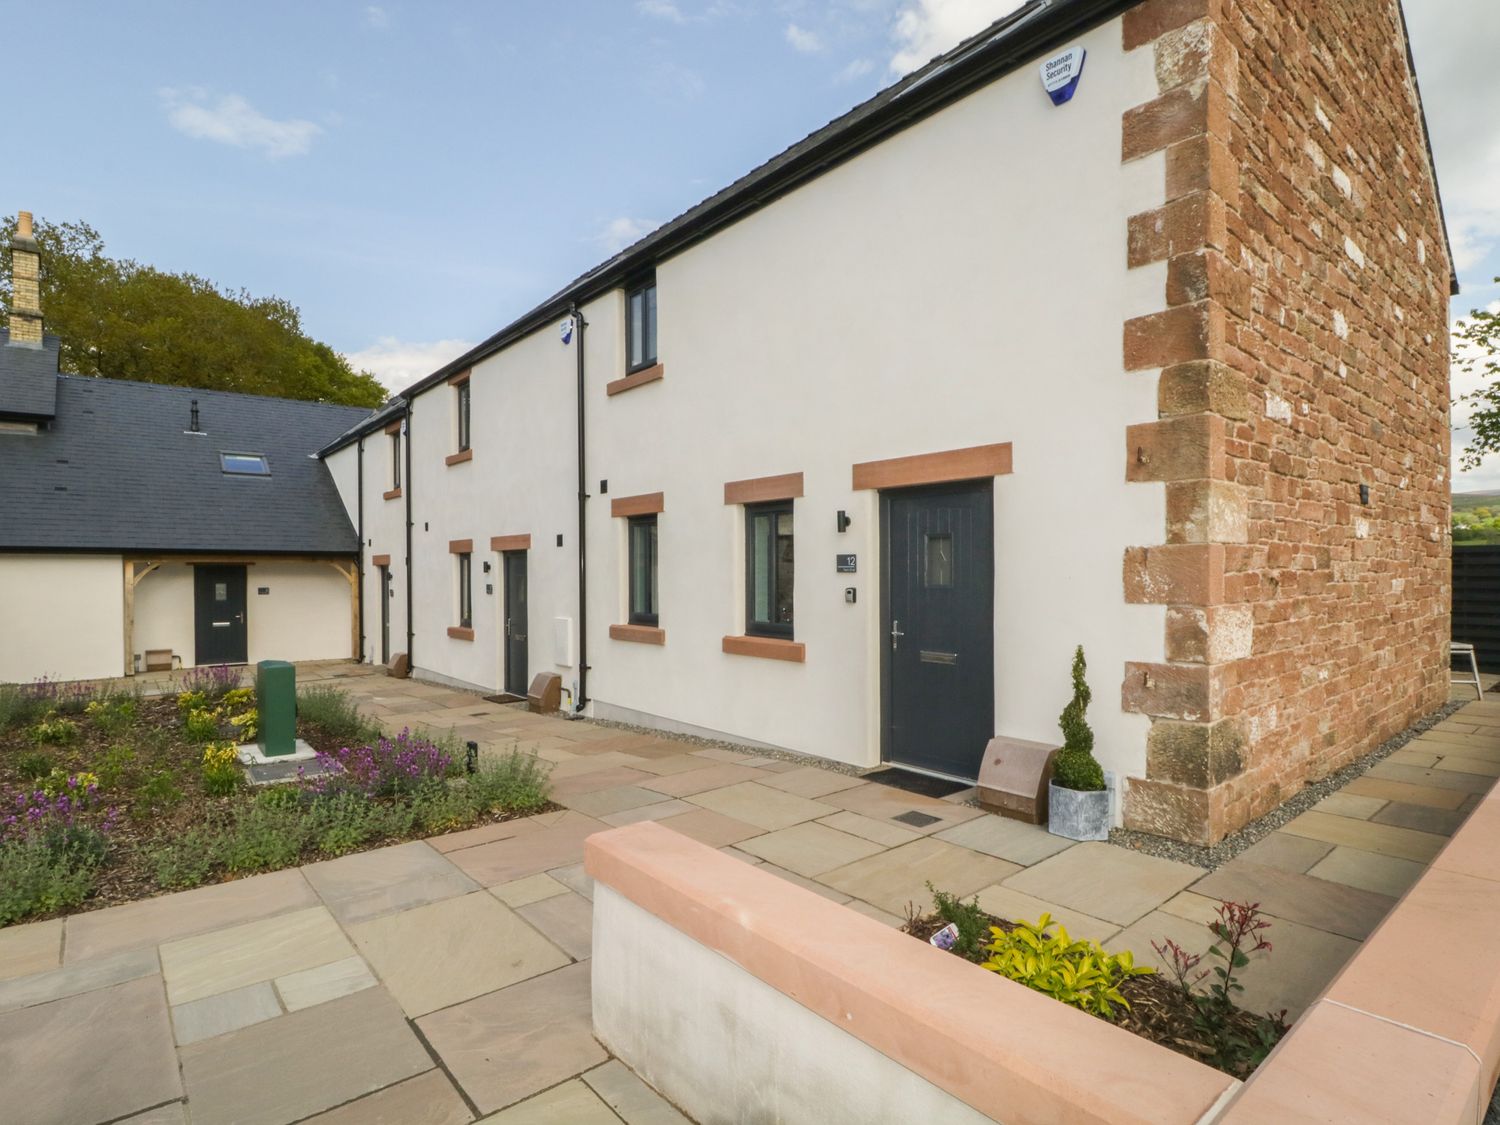 Tarn End Cottages 12 - Lake District - 1074471 - photo 1